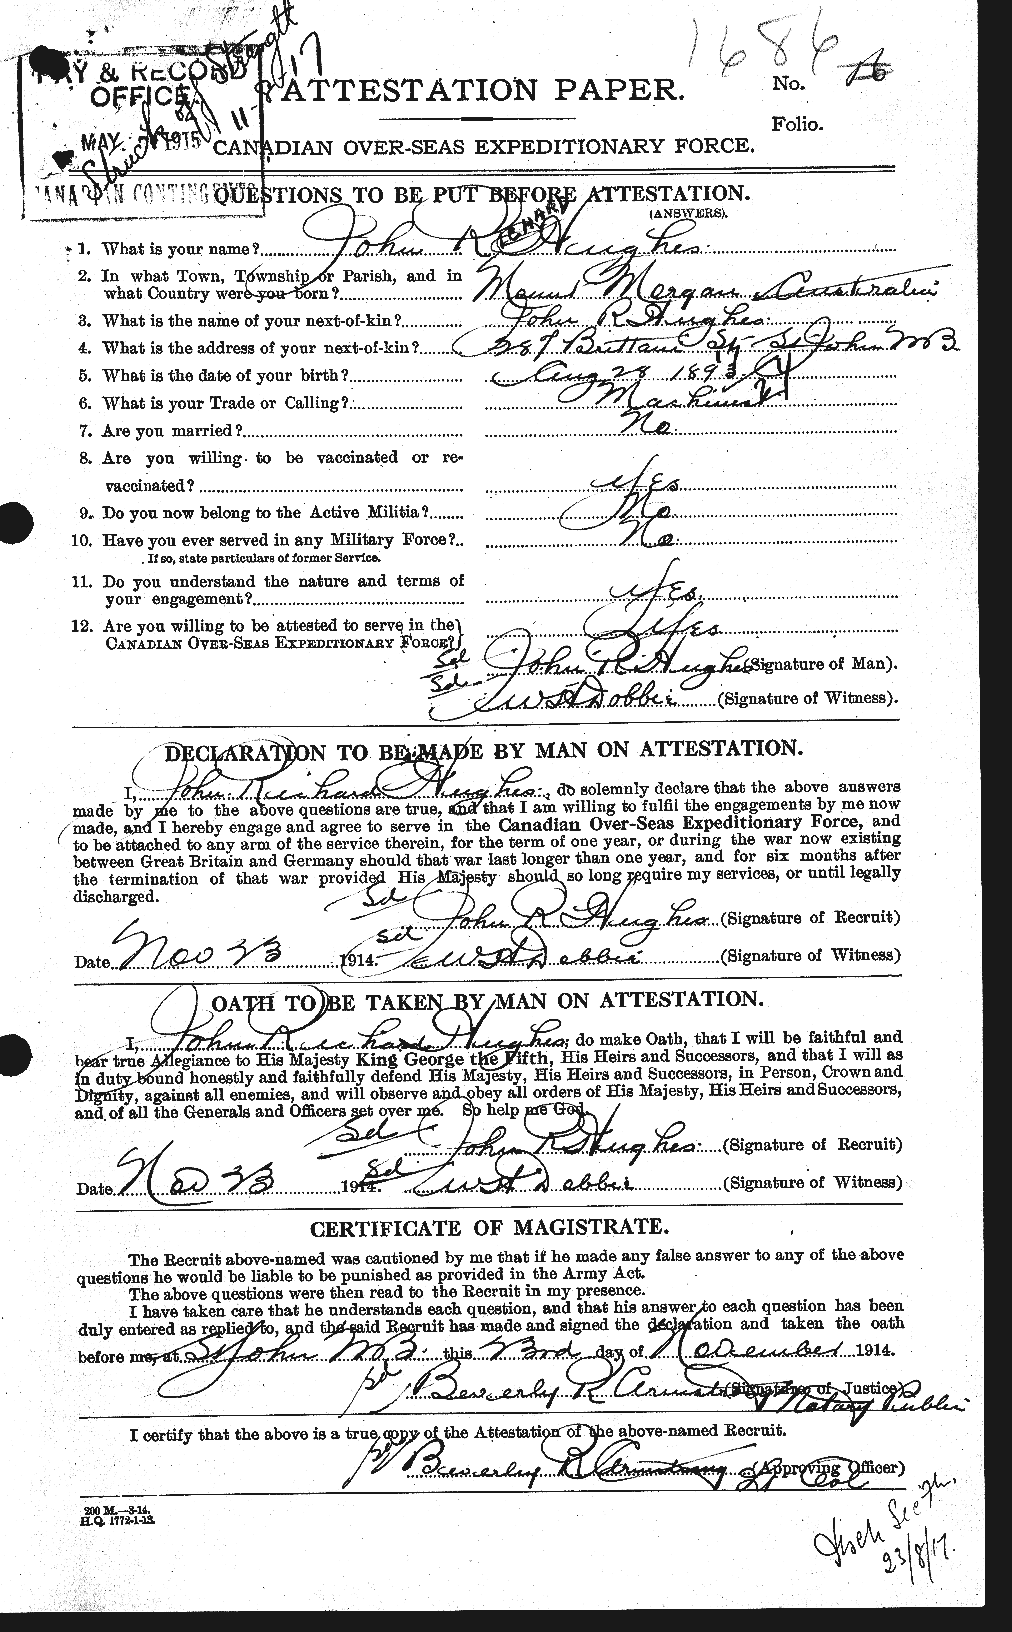 Personnel Records of the First World War - CEF 404046a